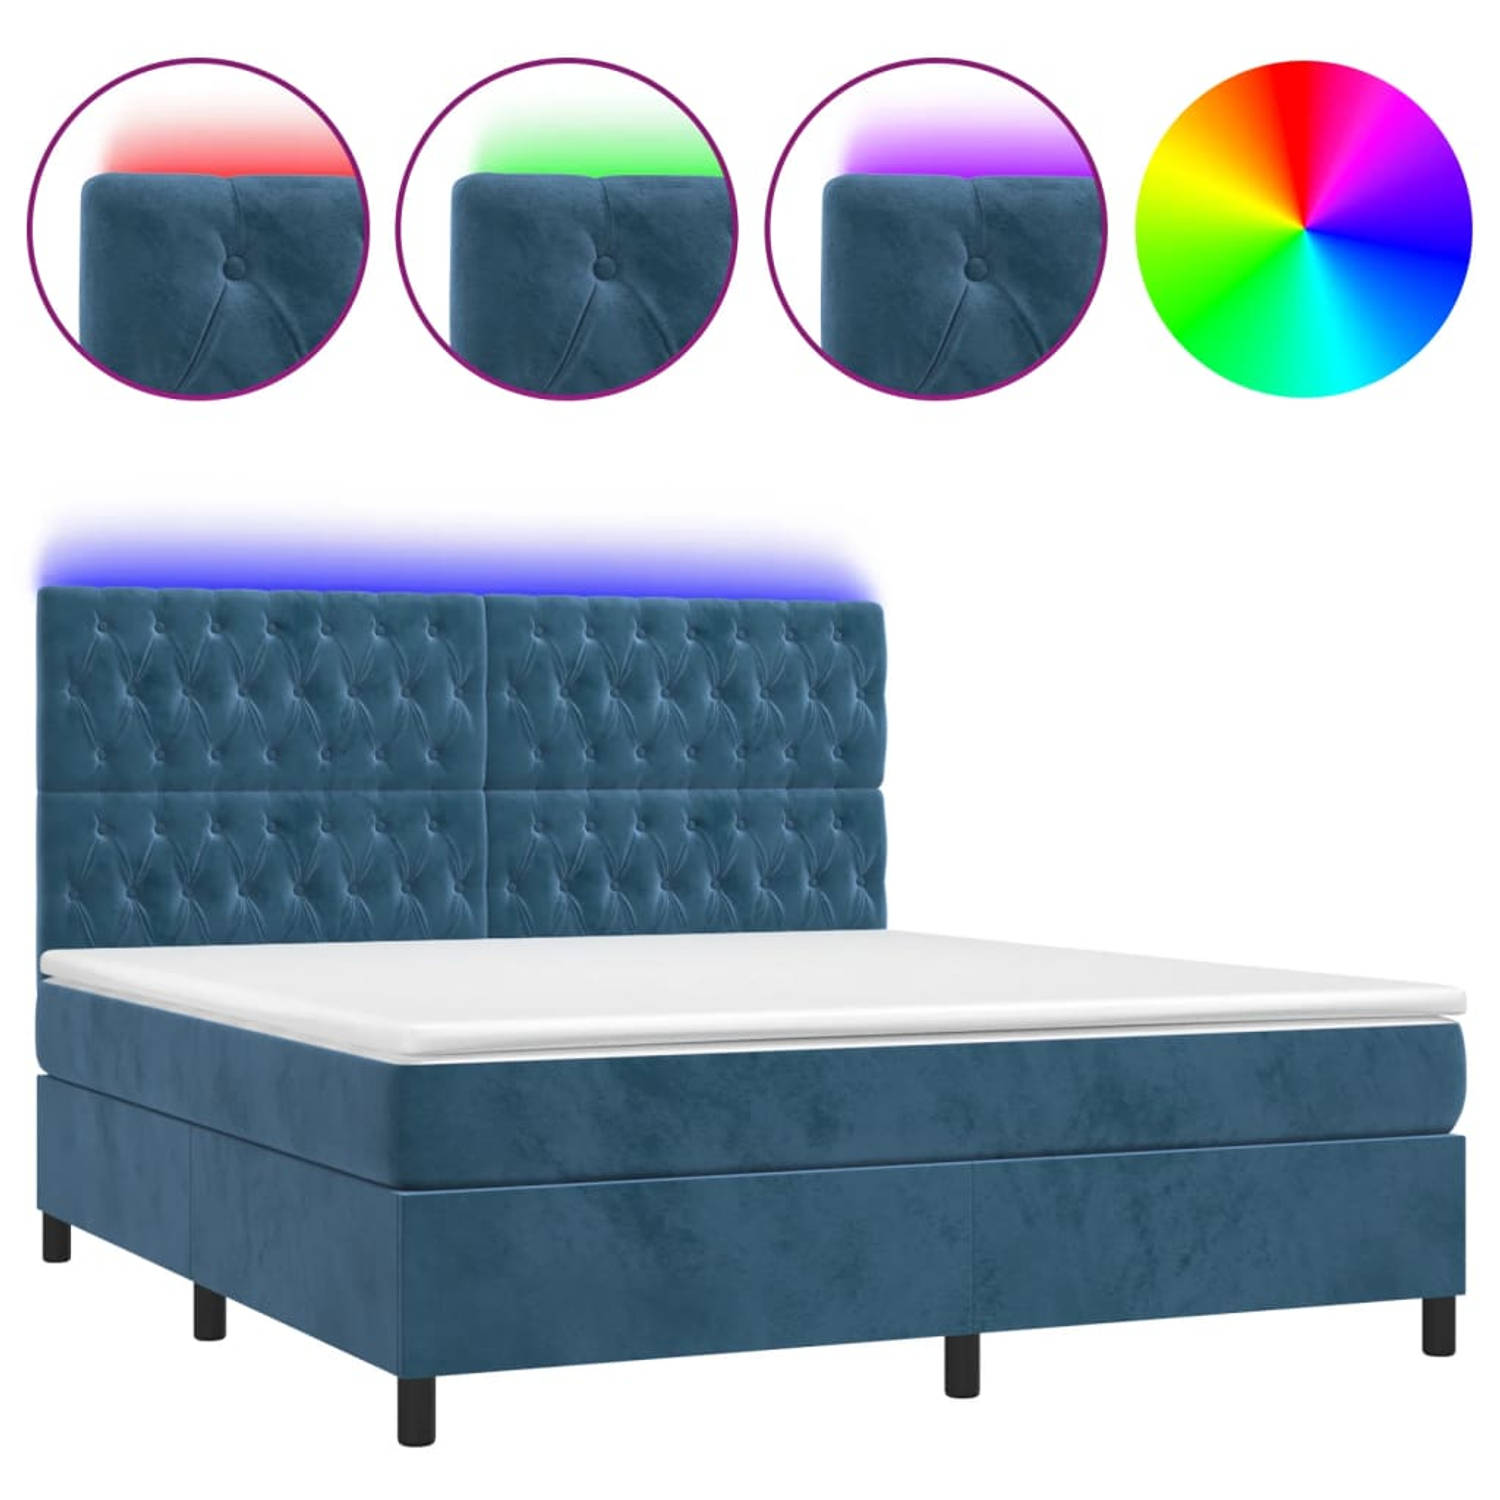 The Living Store Boxspring - Fluwelen Bed met LED - 203 x 180 x 118/128 cm - Donkerblauw